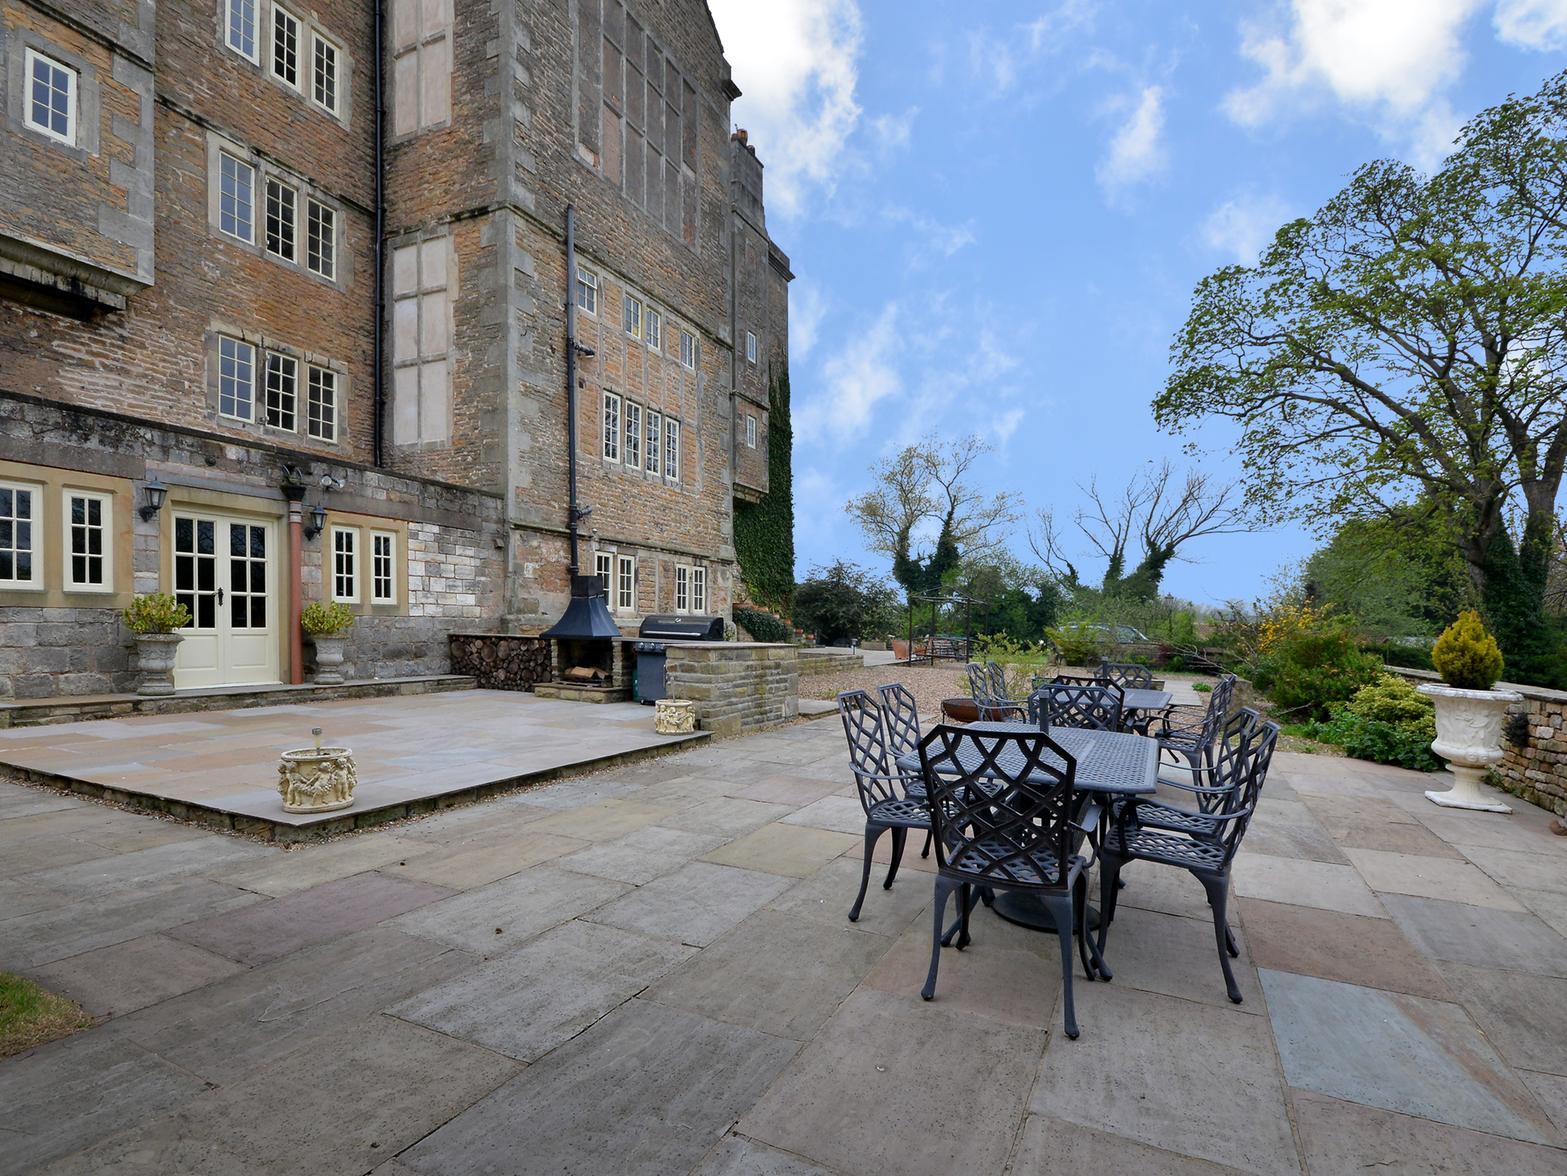 At the rear of the main house is a large patio area that could be perfect for garden parties.